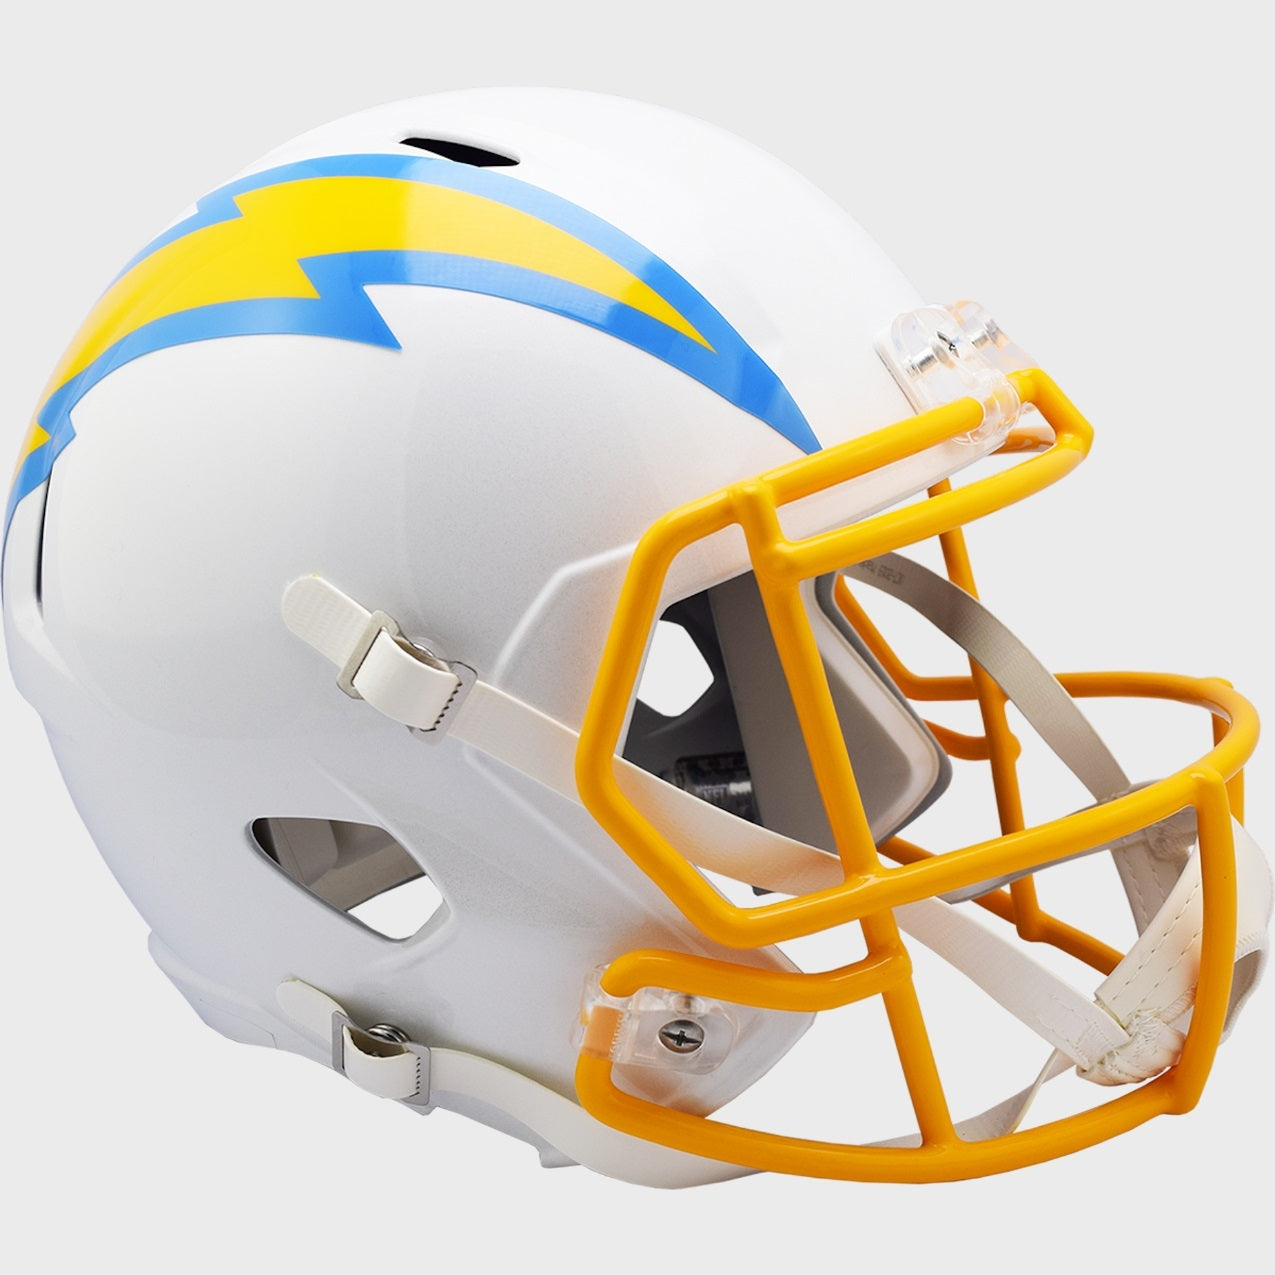 Los Angeles Chargers 2020 Full Size Speed Replica Helmet